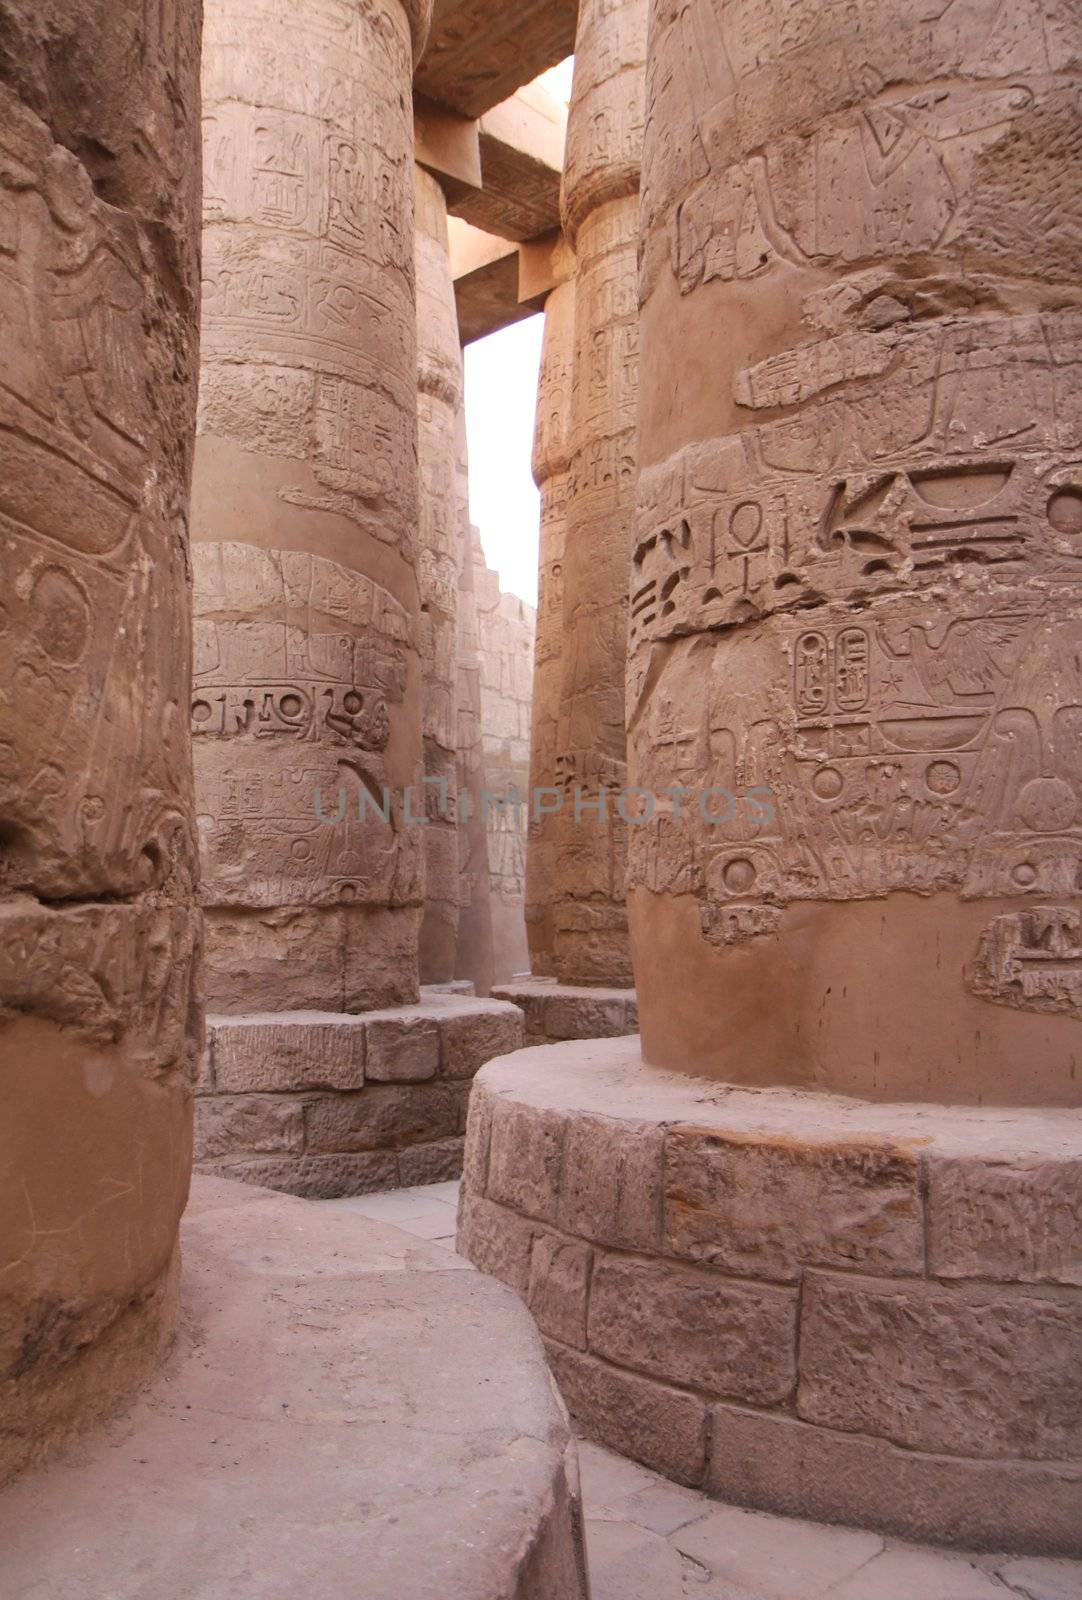 Ancient stone columns in the temple of Karnak in Egypt